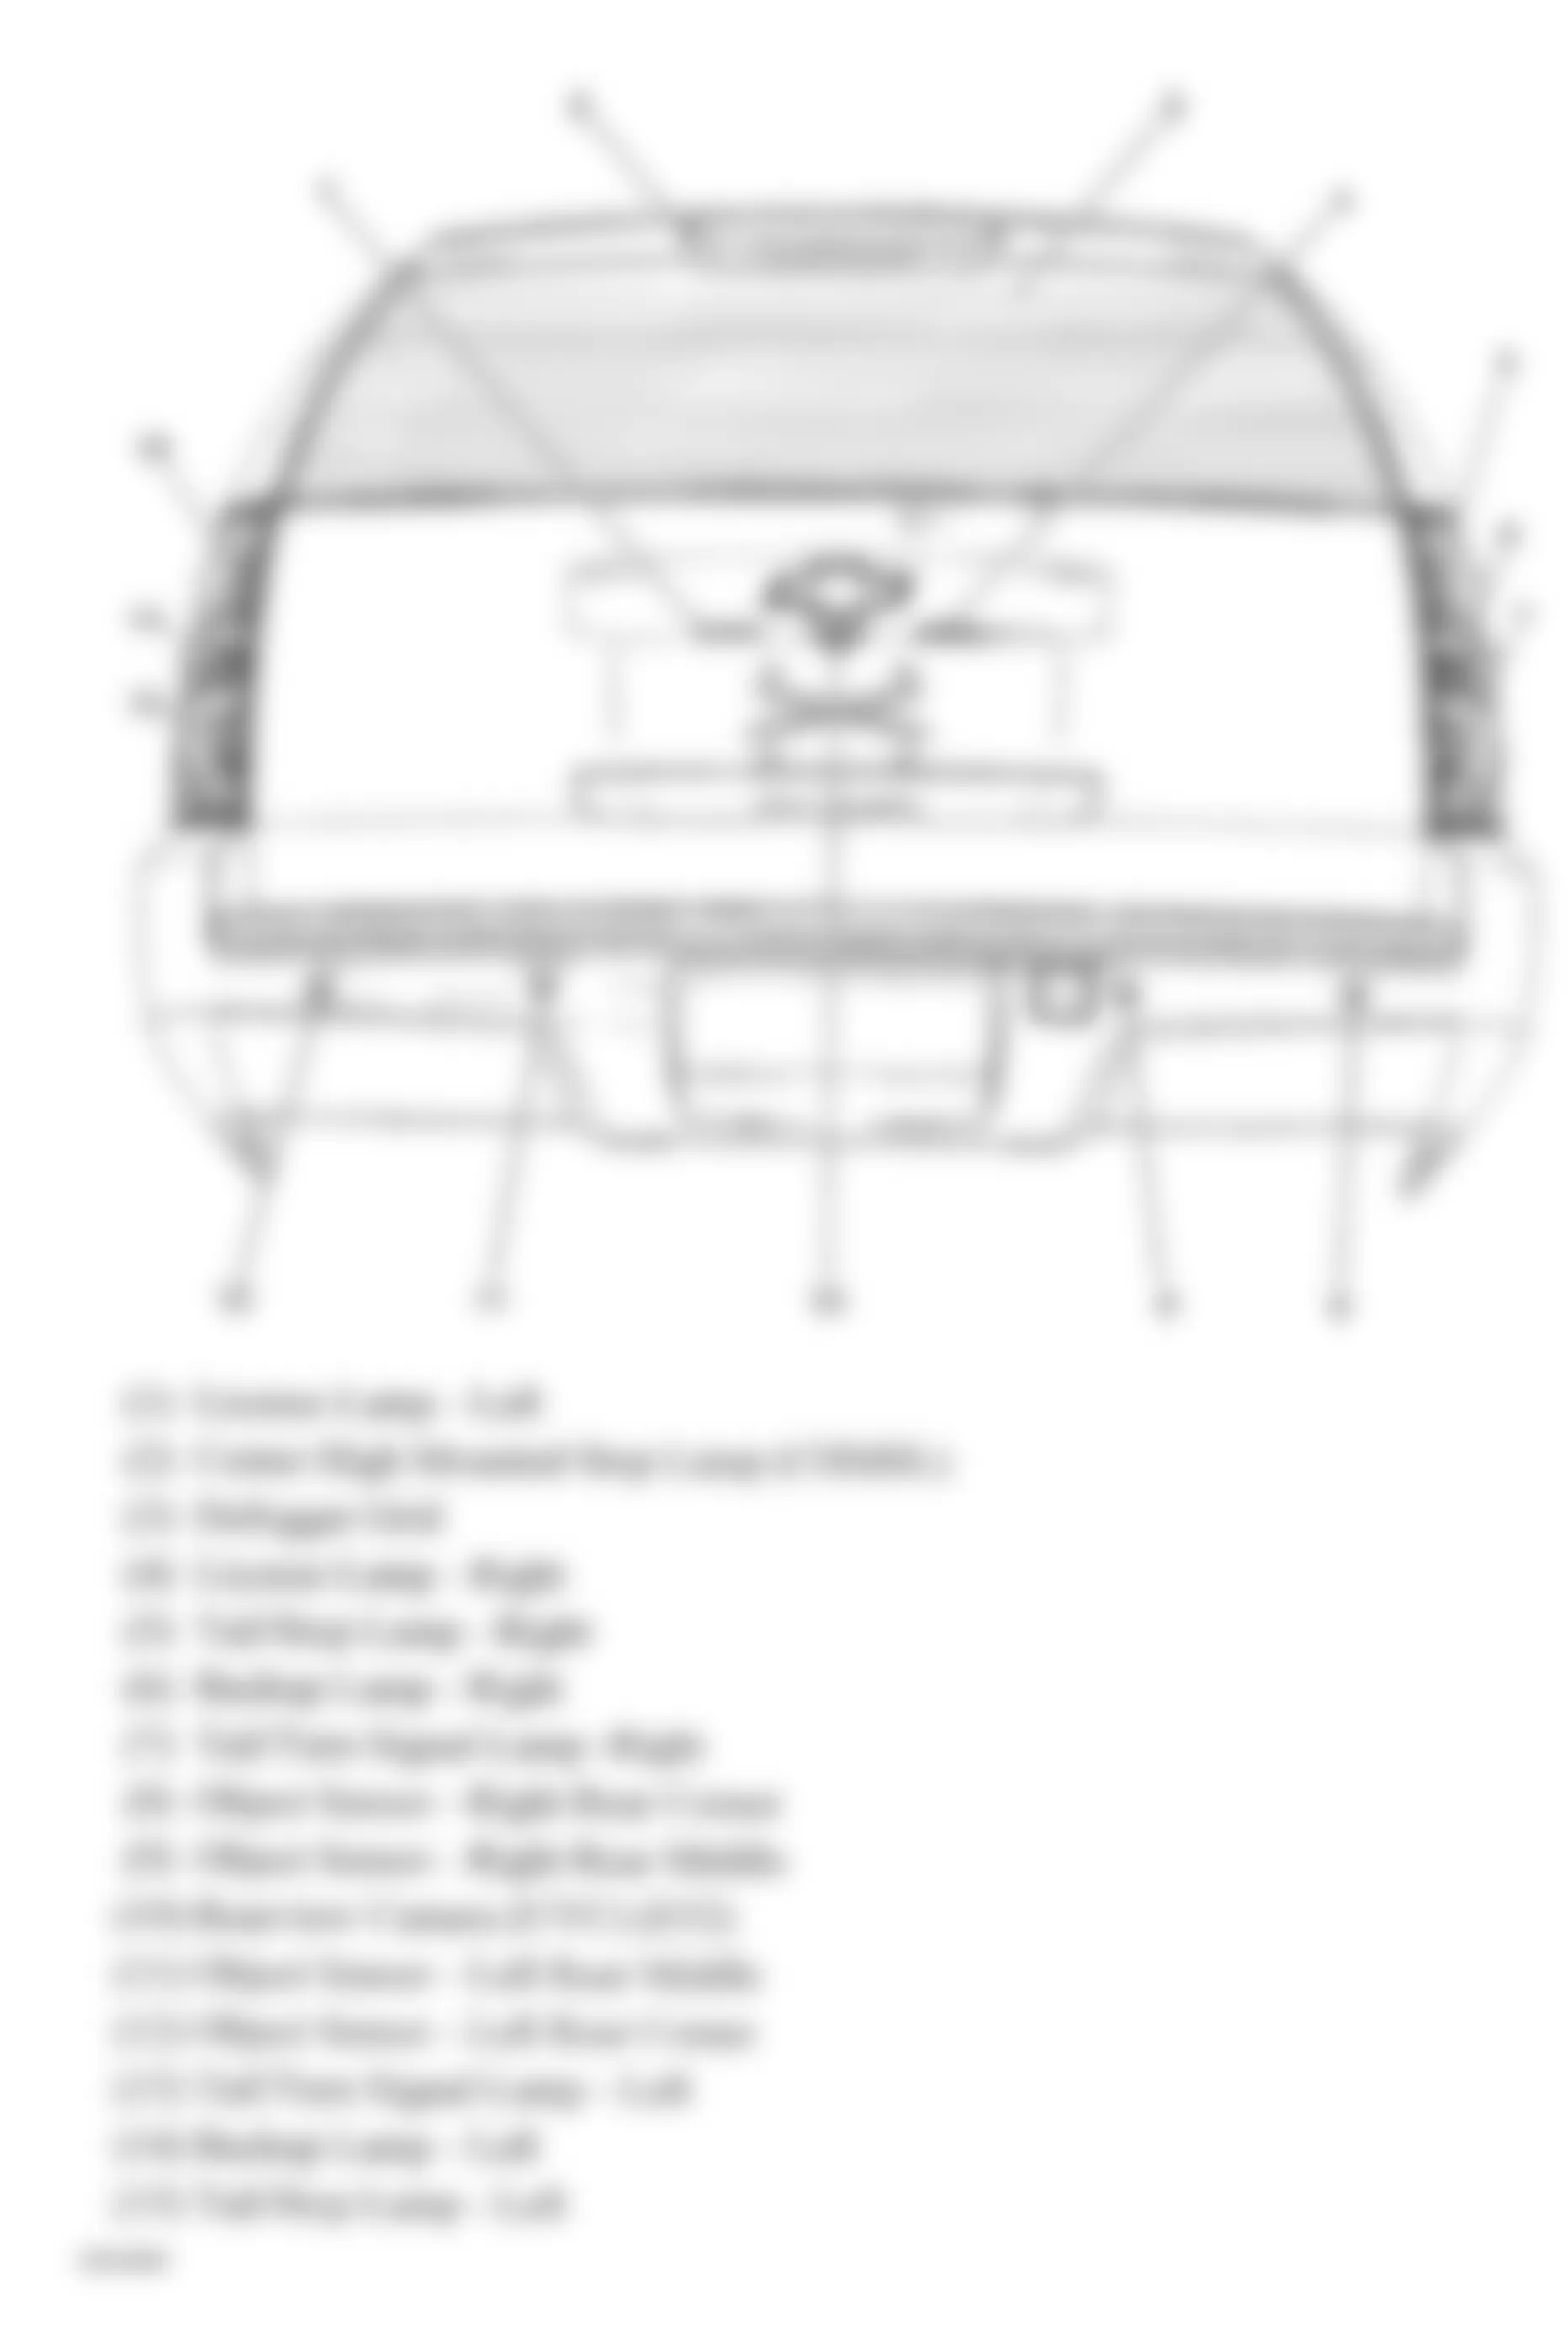 GMC Yukon XL K2500 2007 - Component Locations -  Rear Of Vehicle (Avalanche, Suburban & Tahoe W/One Piece Liftgate)